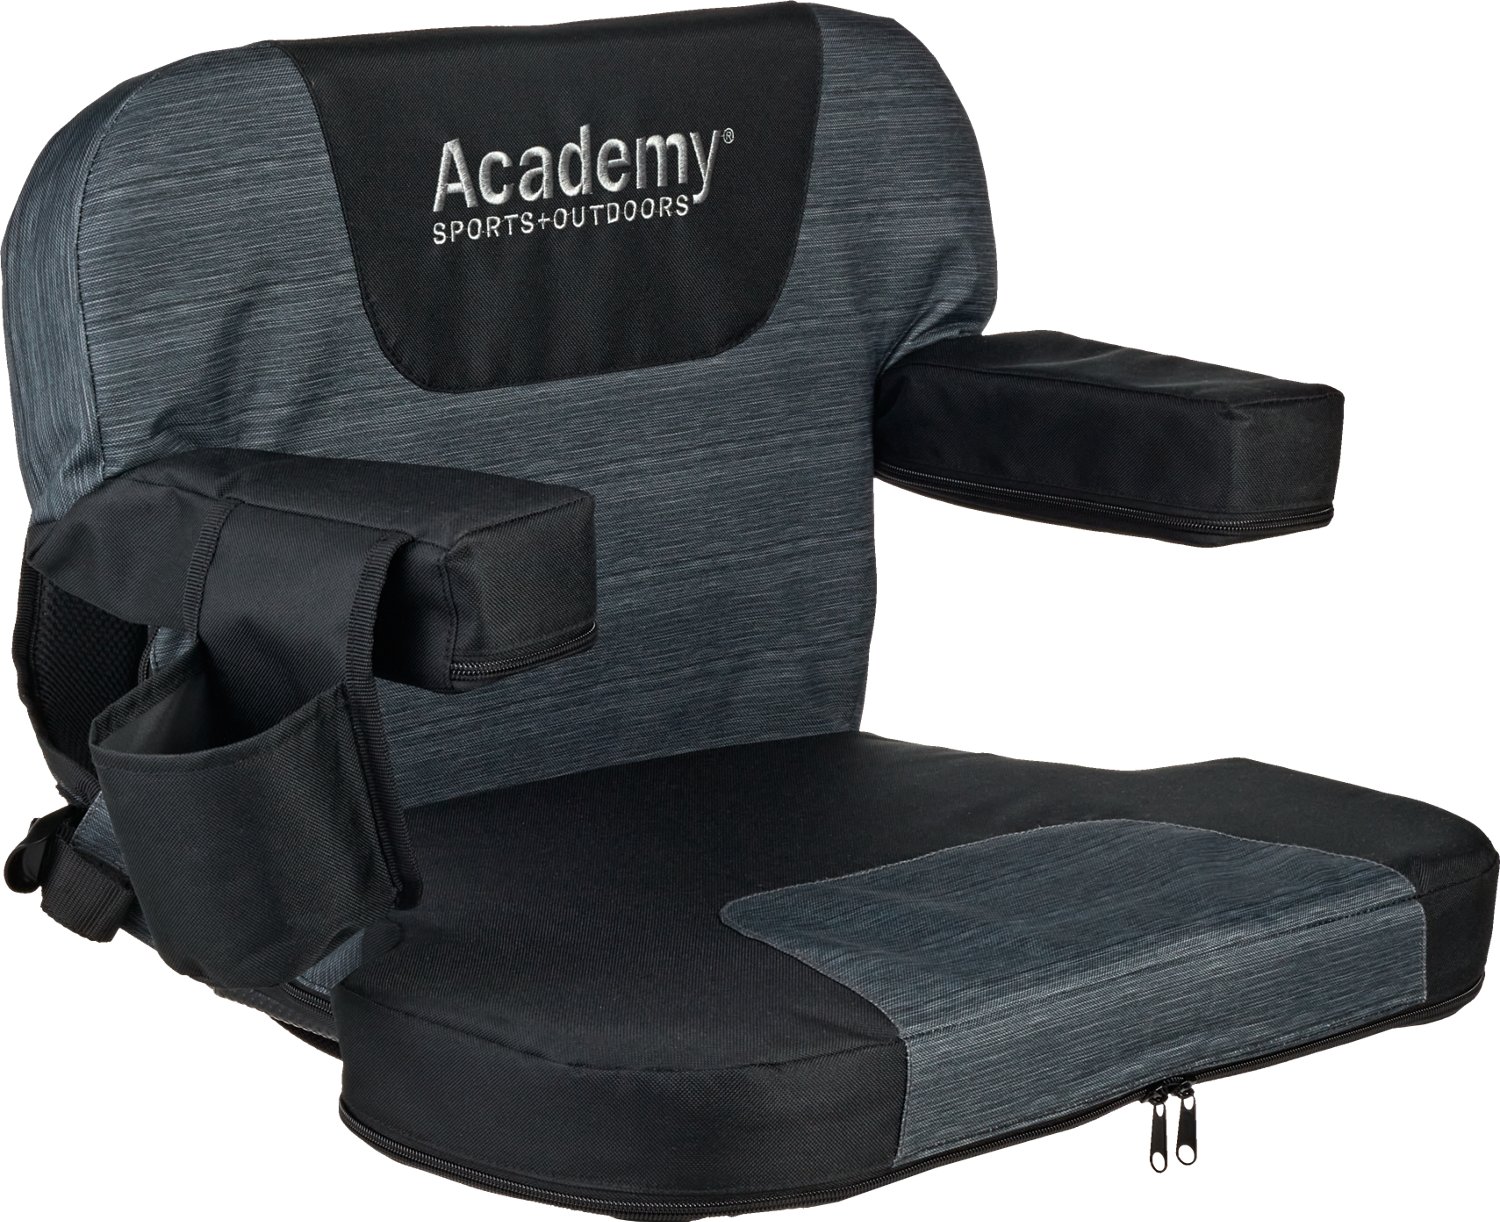 https://academy.scene7.com/is/image/academy/21048281?$d-plp-product-image$